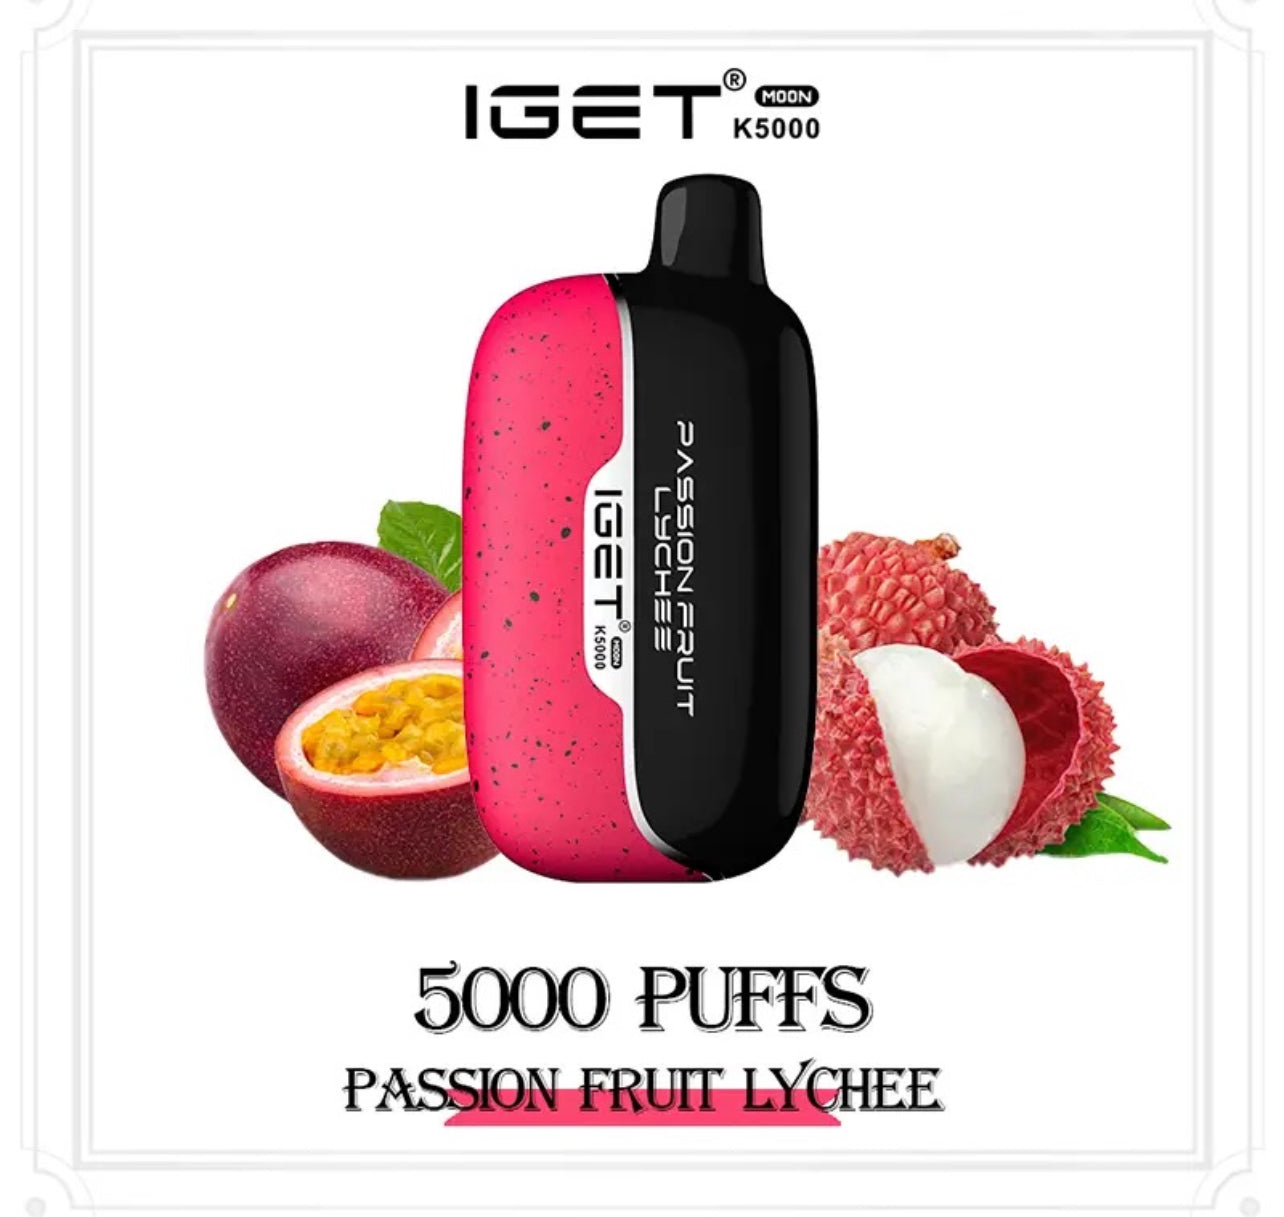 IGET MOON PASSION FRUIT LYCHEE 5000 PUFFS